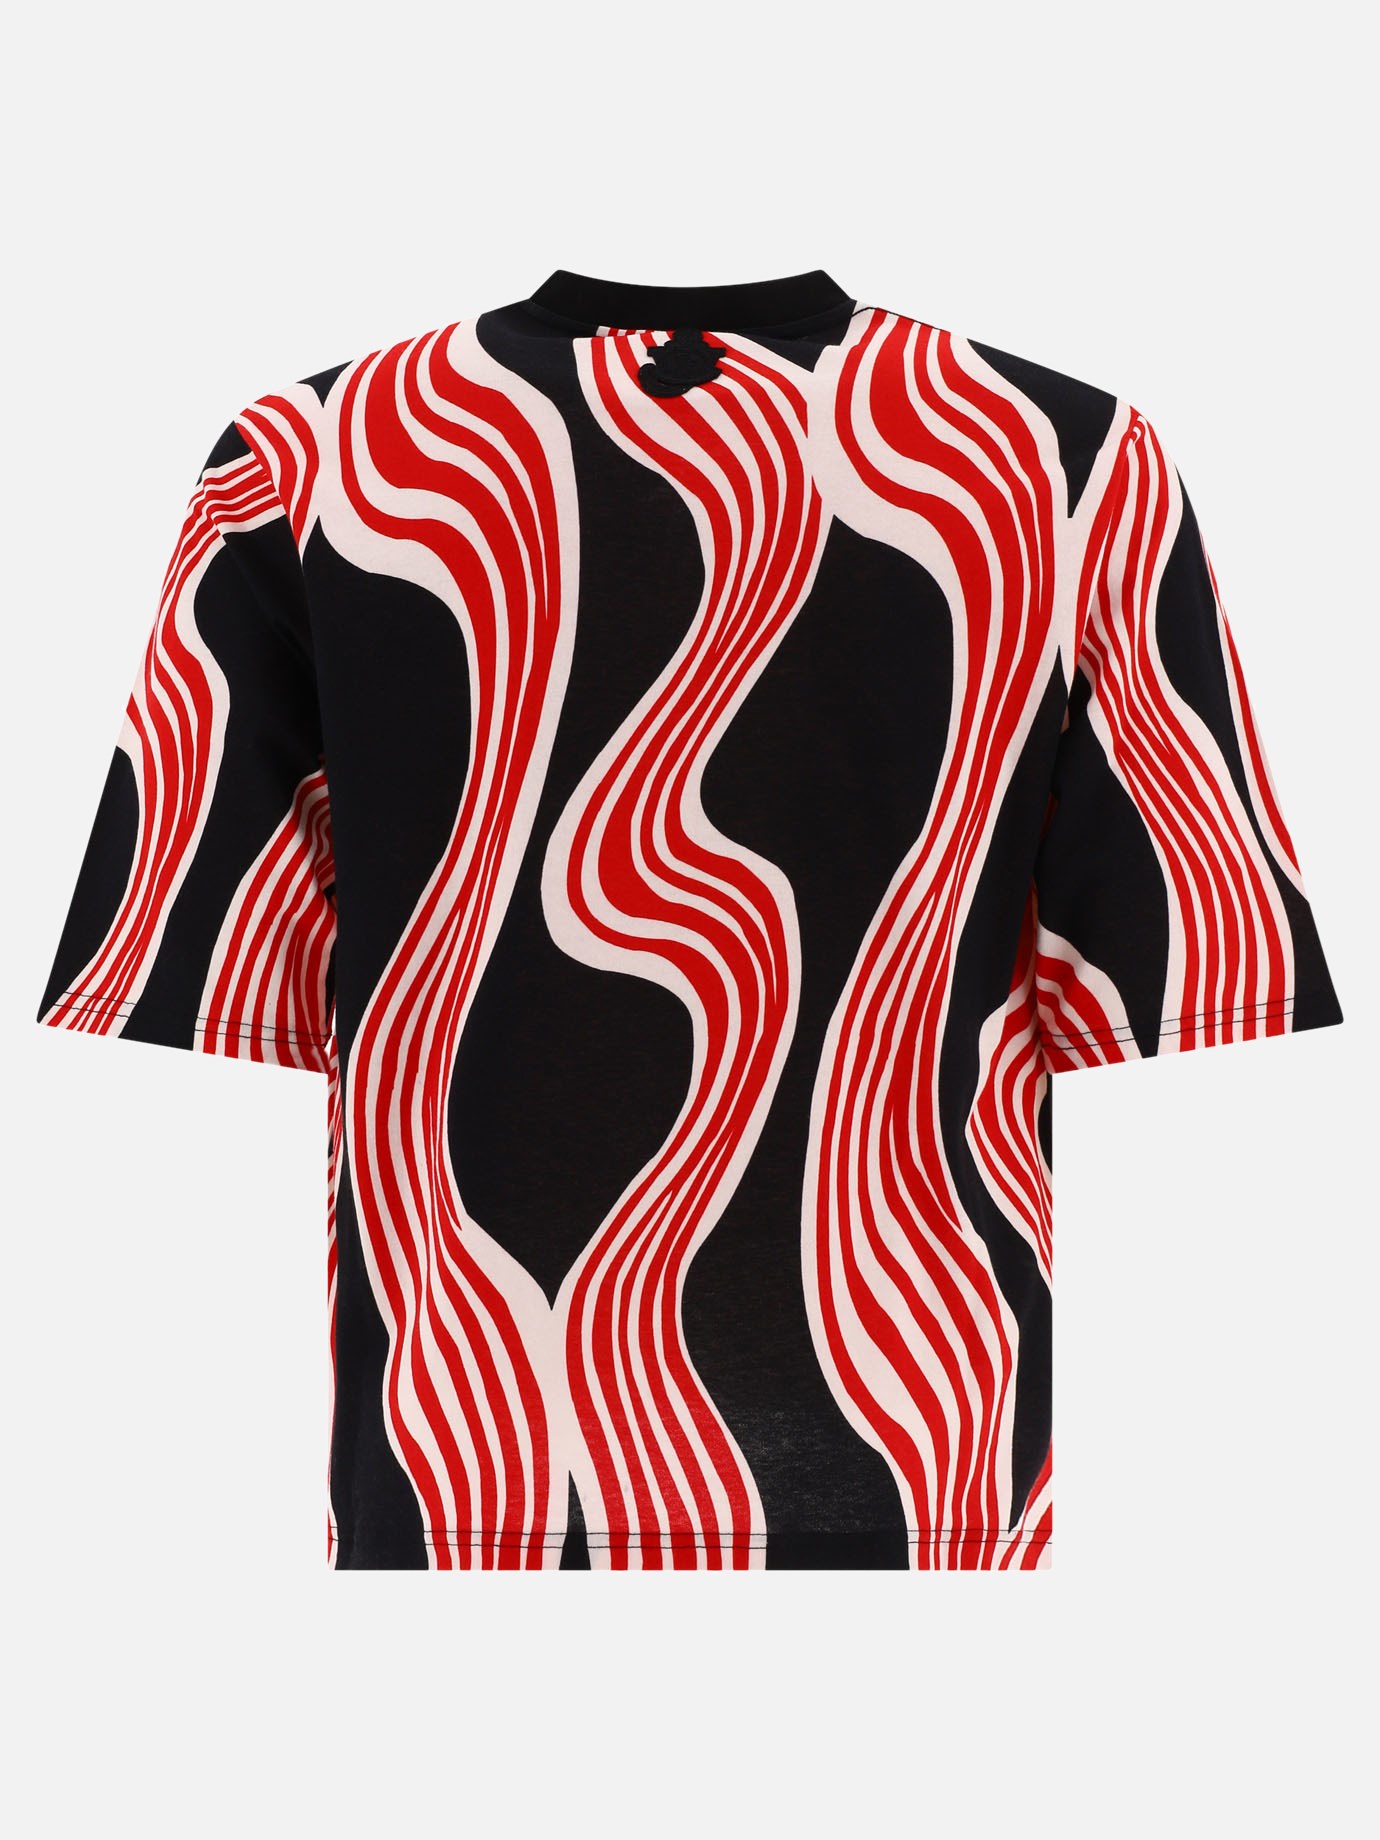 T-shirt  JW Anderson  by Moncler Genius